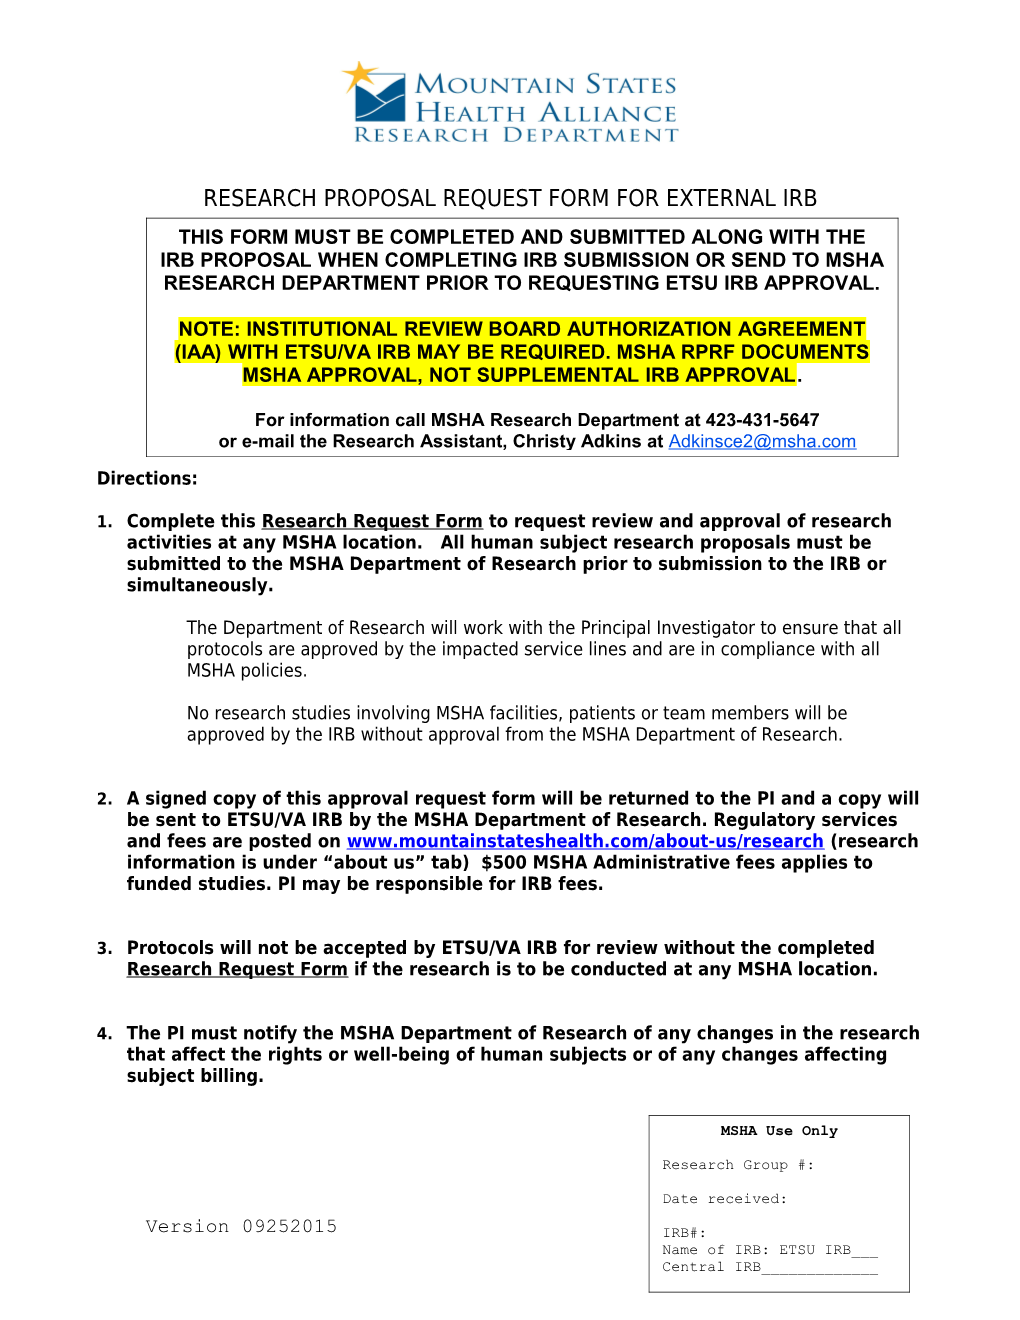 Research Proposal Request Form for External Irb